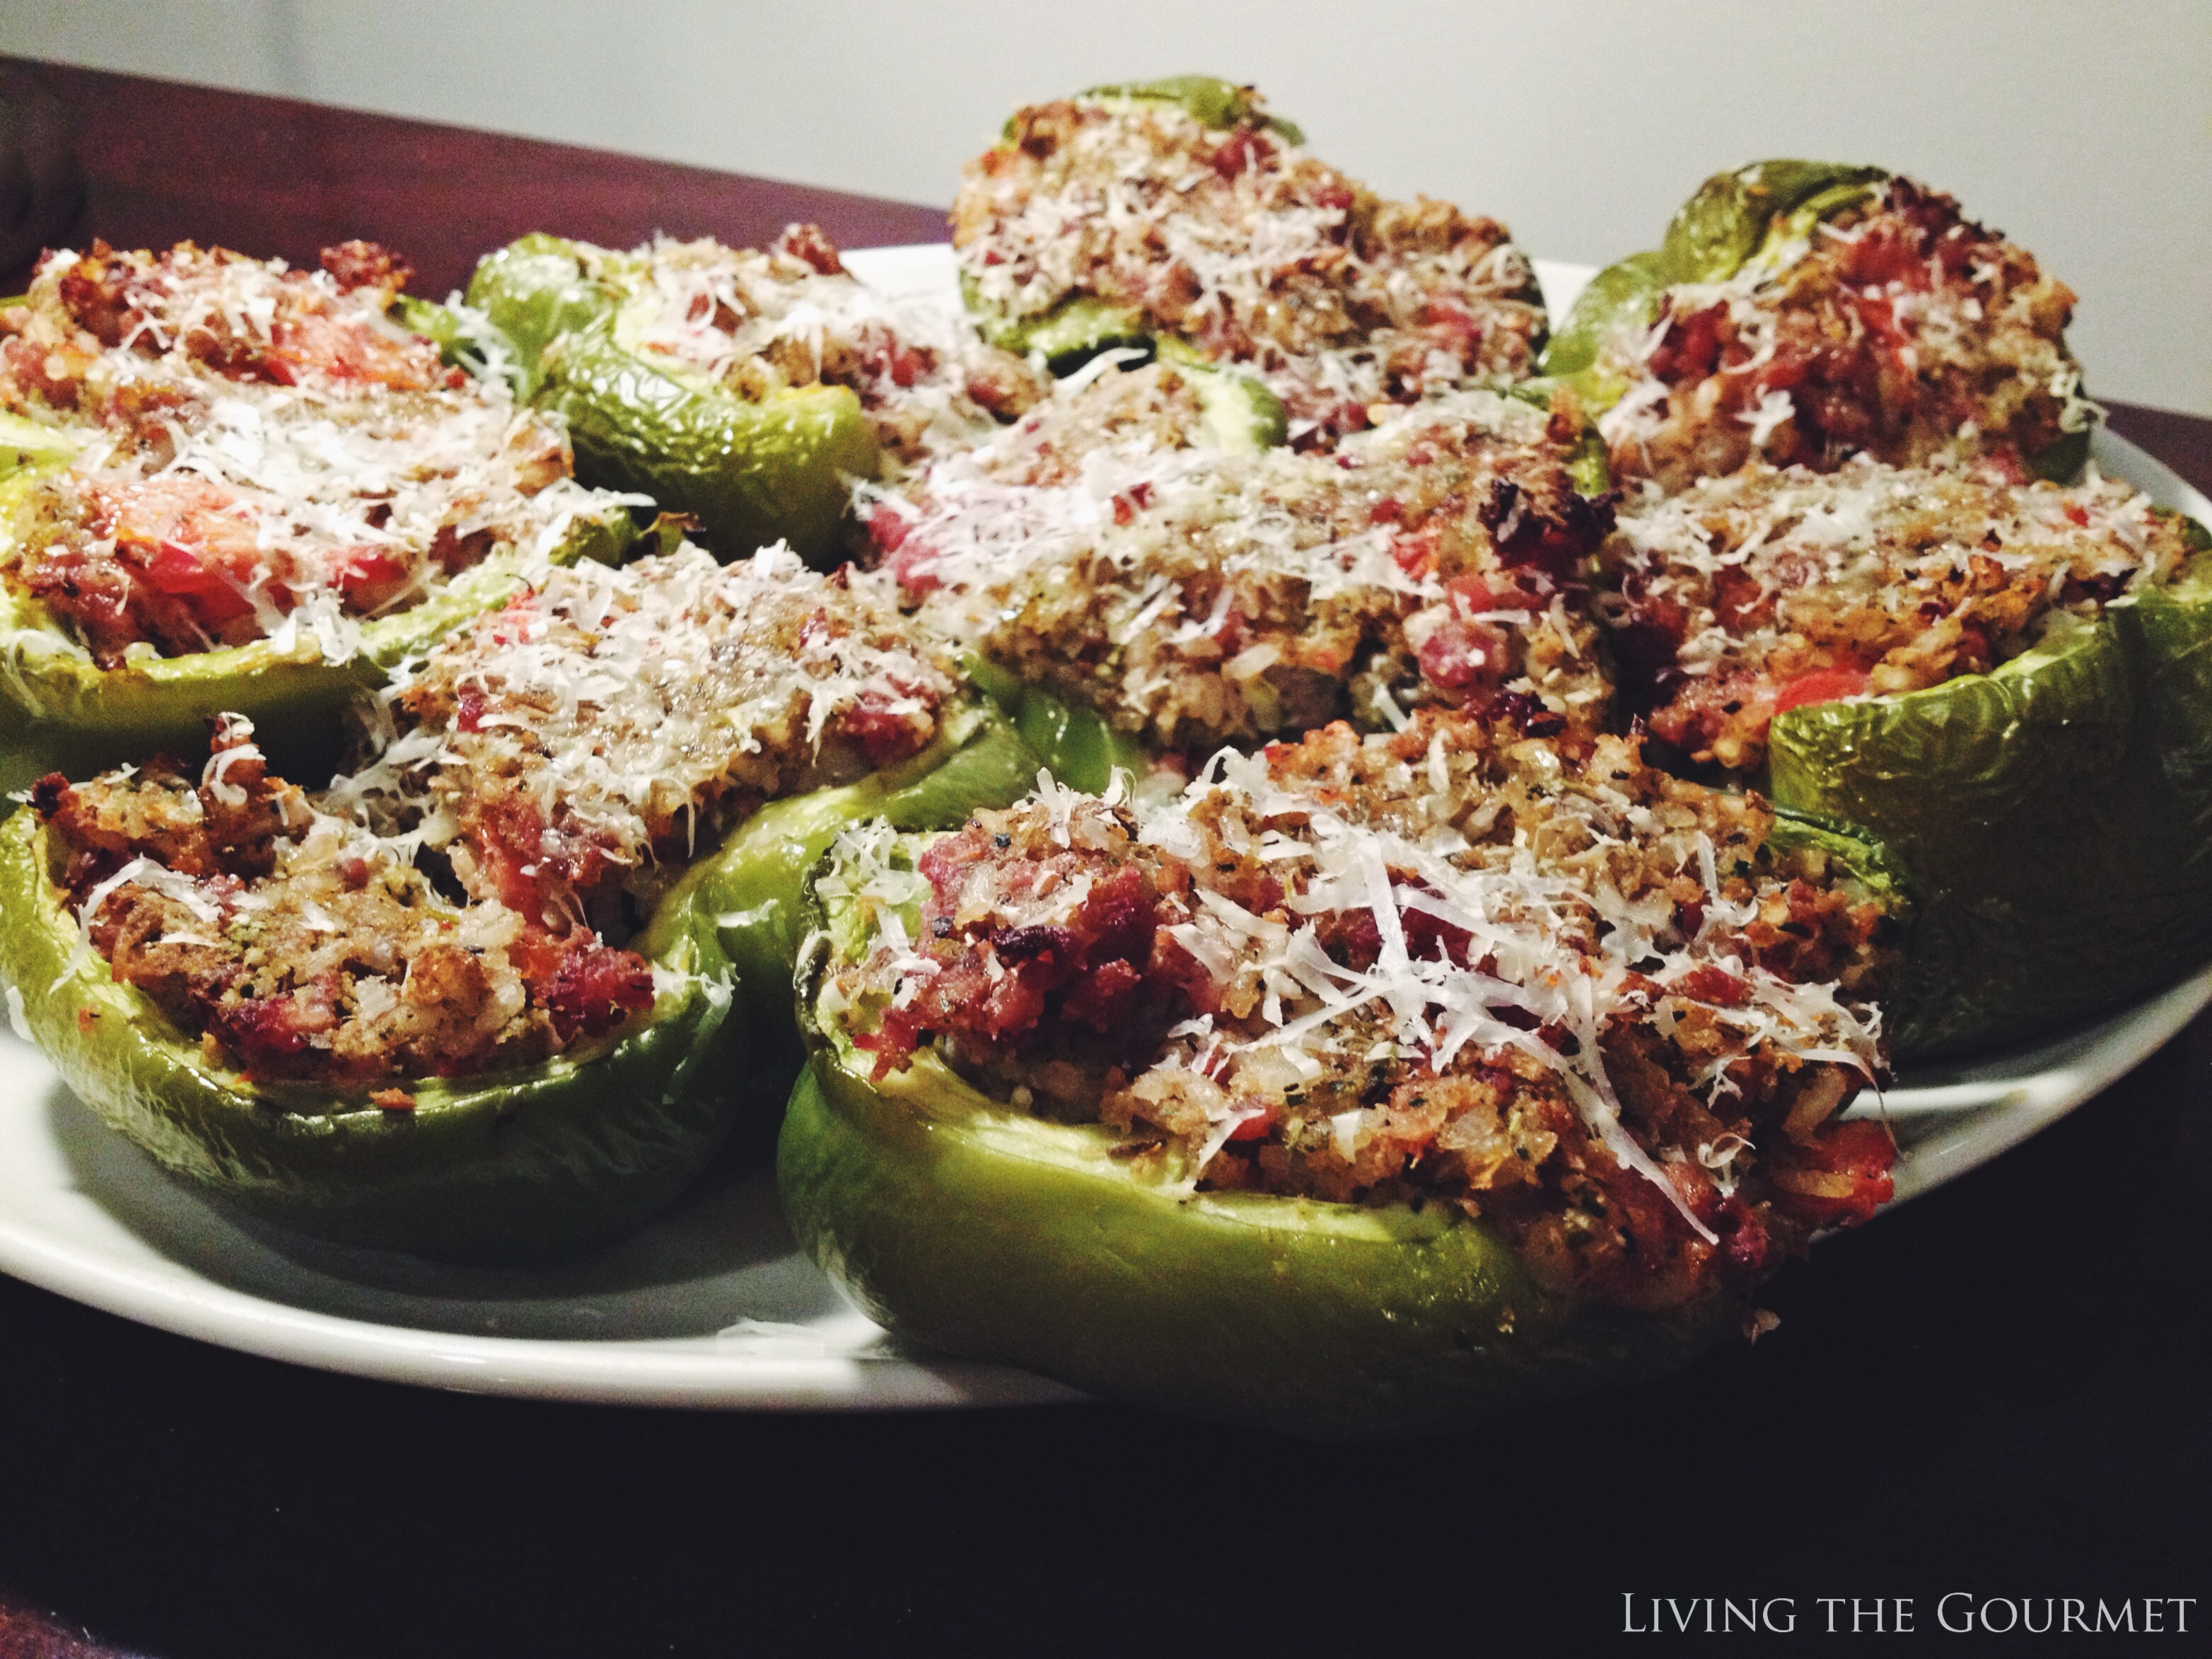 Living the Gourmet: Stuffed Peppers